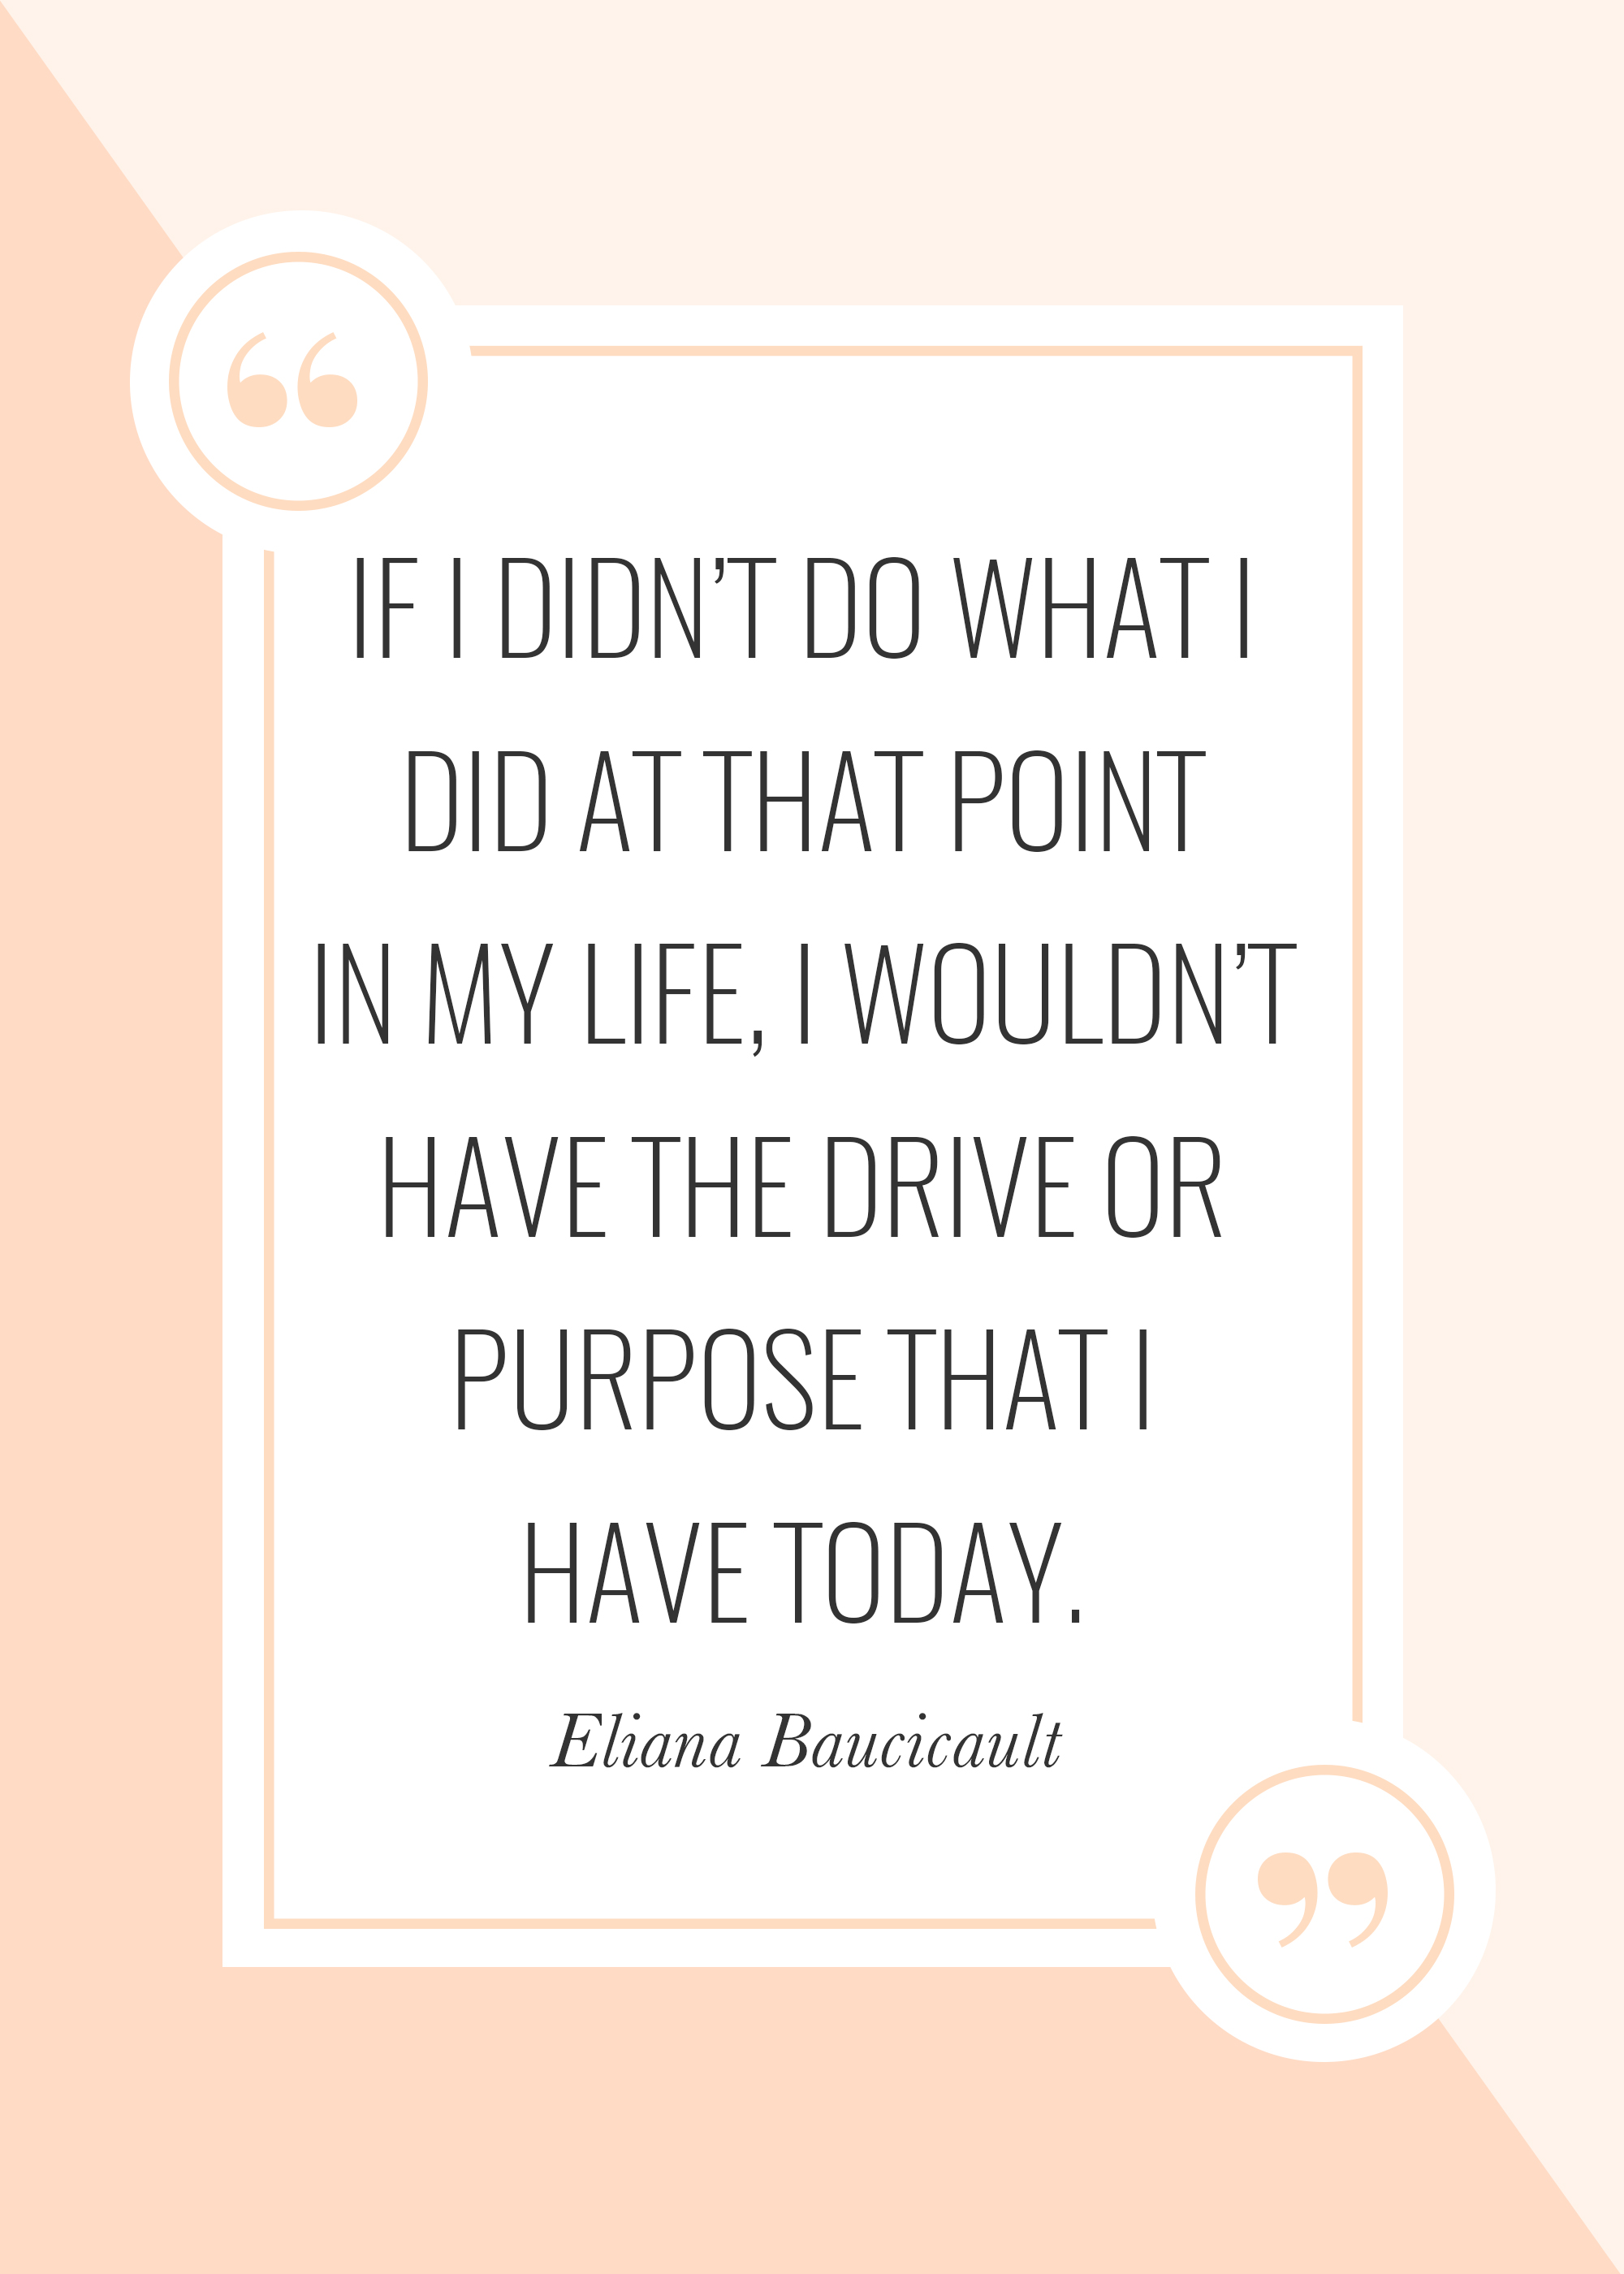 If I didn't do what I did at that point in my life, I wouldn't have the drive or purpose that I have today. -- Eliana Baucicault discusses celebrating diversity and why she started her magazine, The B Collective, on The Power in Purpose podcast